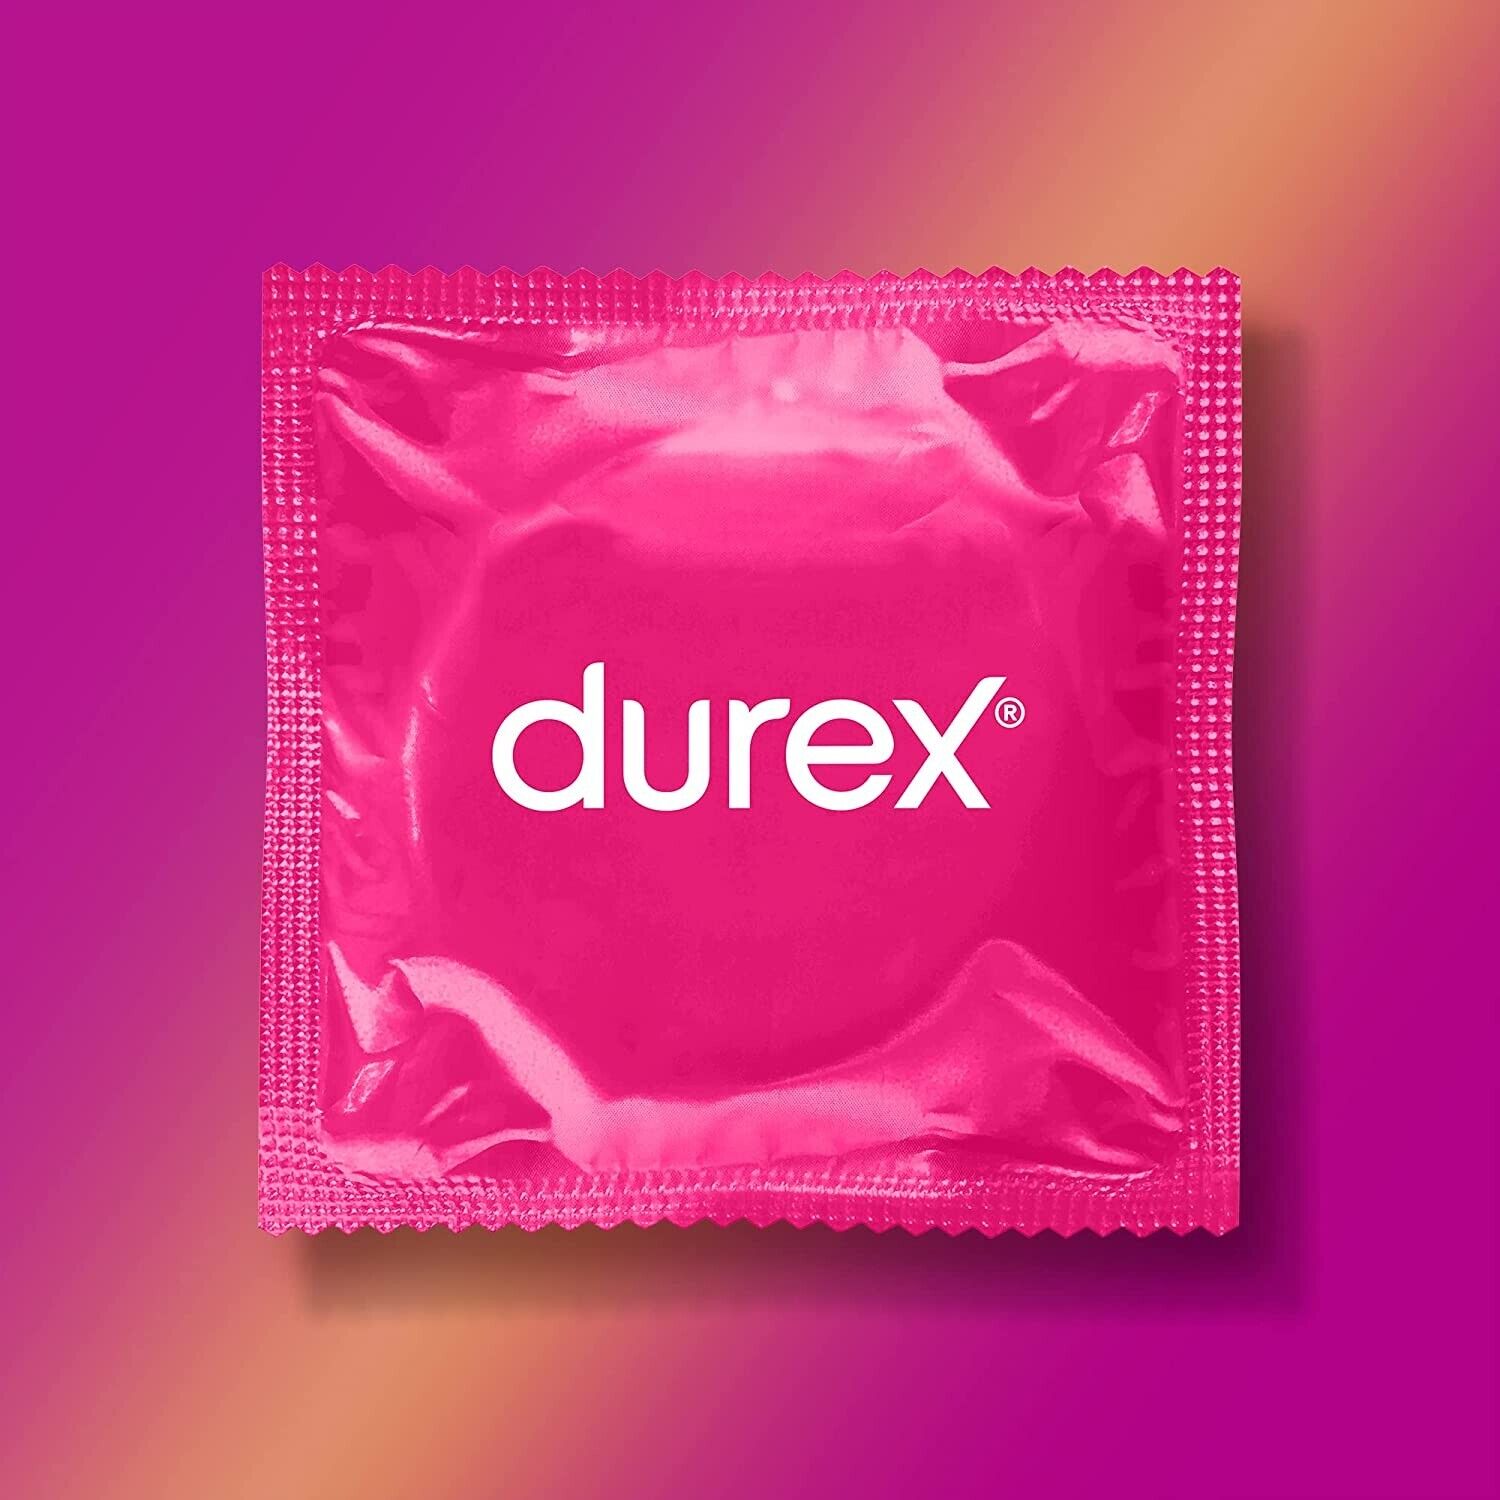 DUREX Ribbed and Dotted Pleasure Me Condoms 12 Pack x 3